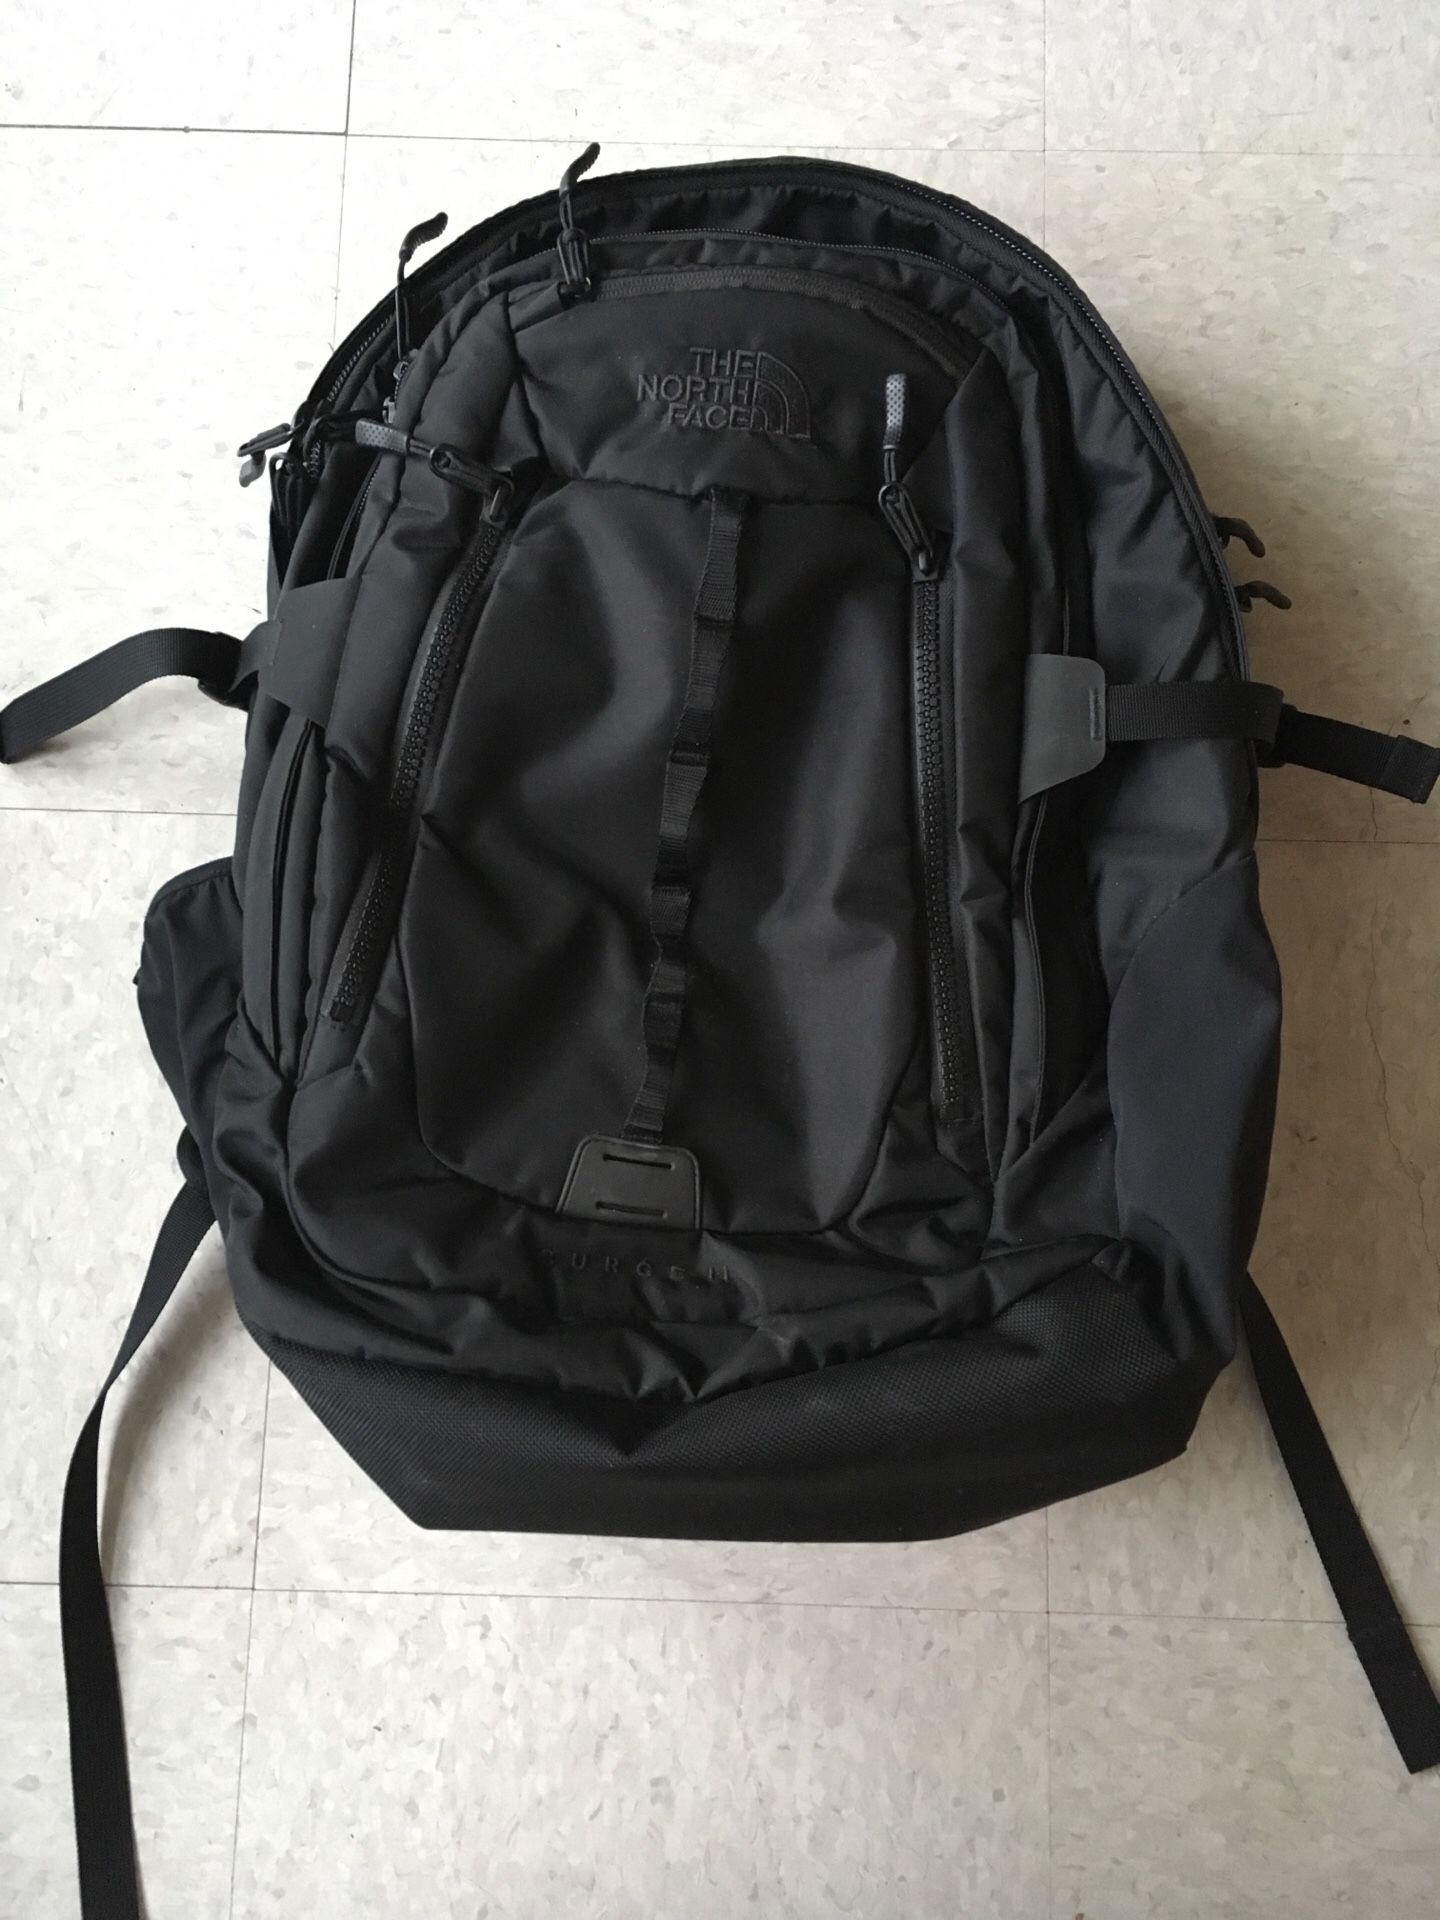 The North Face Surge II backpack